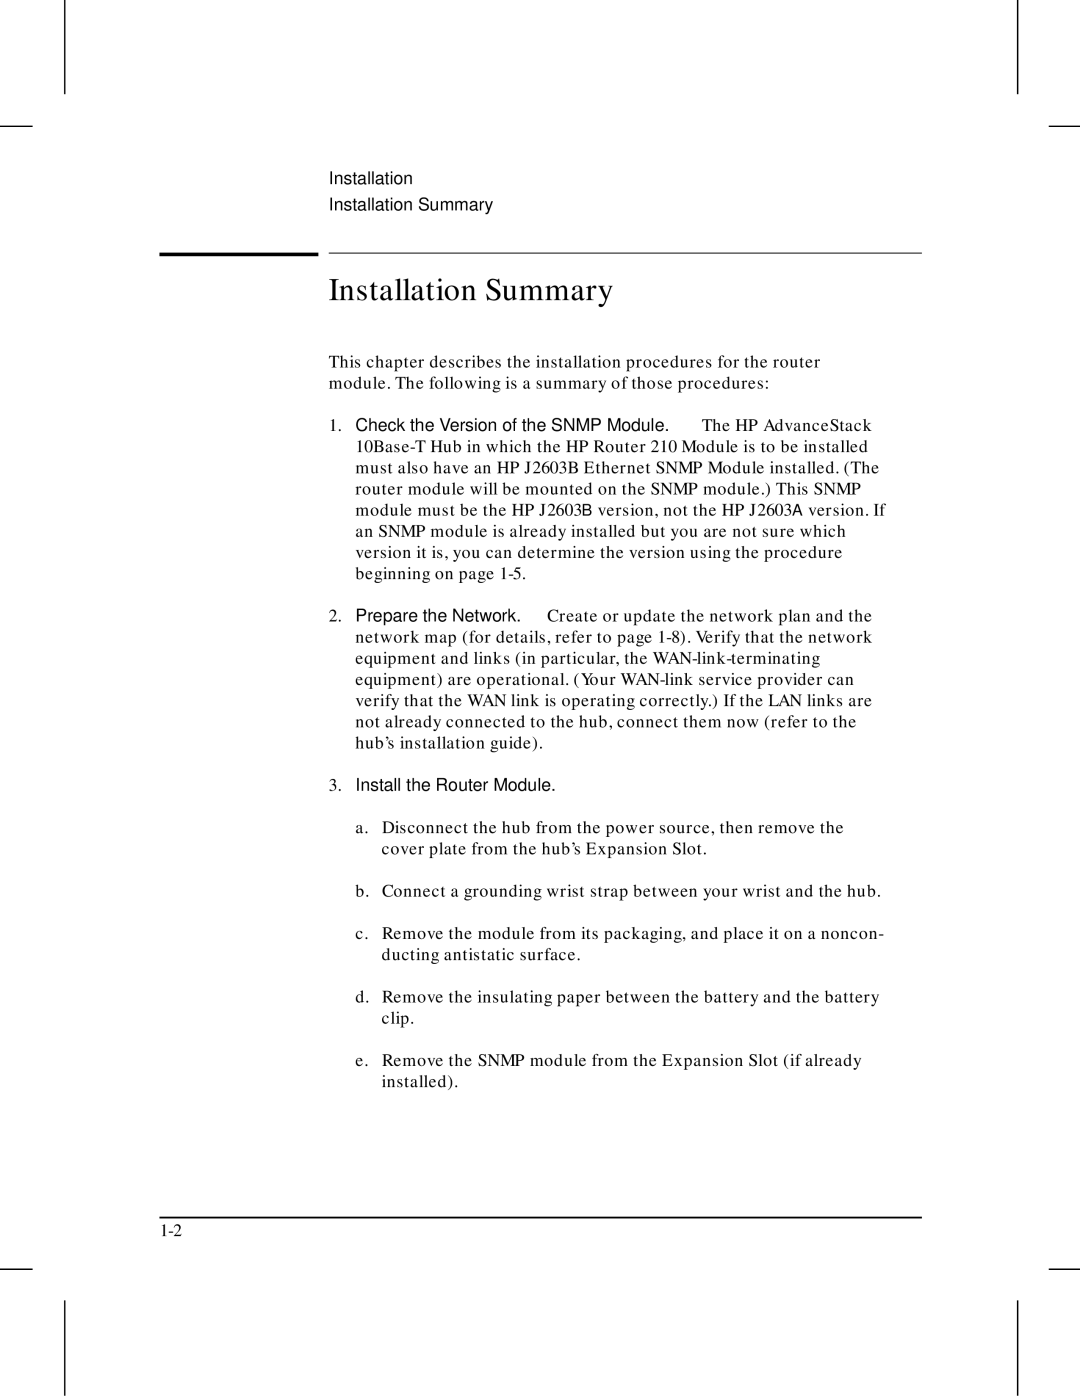 HP 210 manual Installation Summary, Install the Router Module 